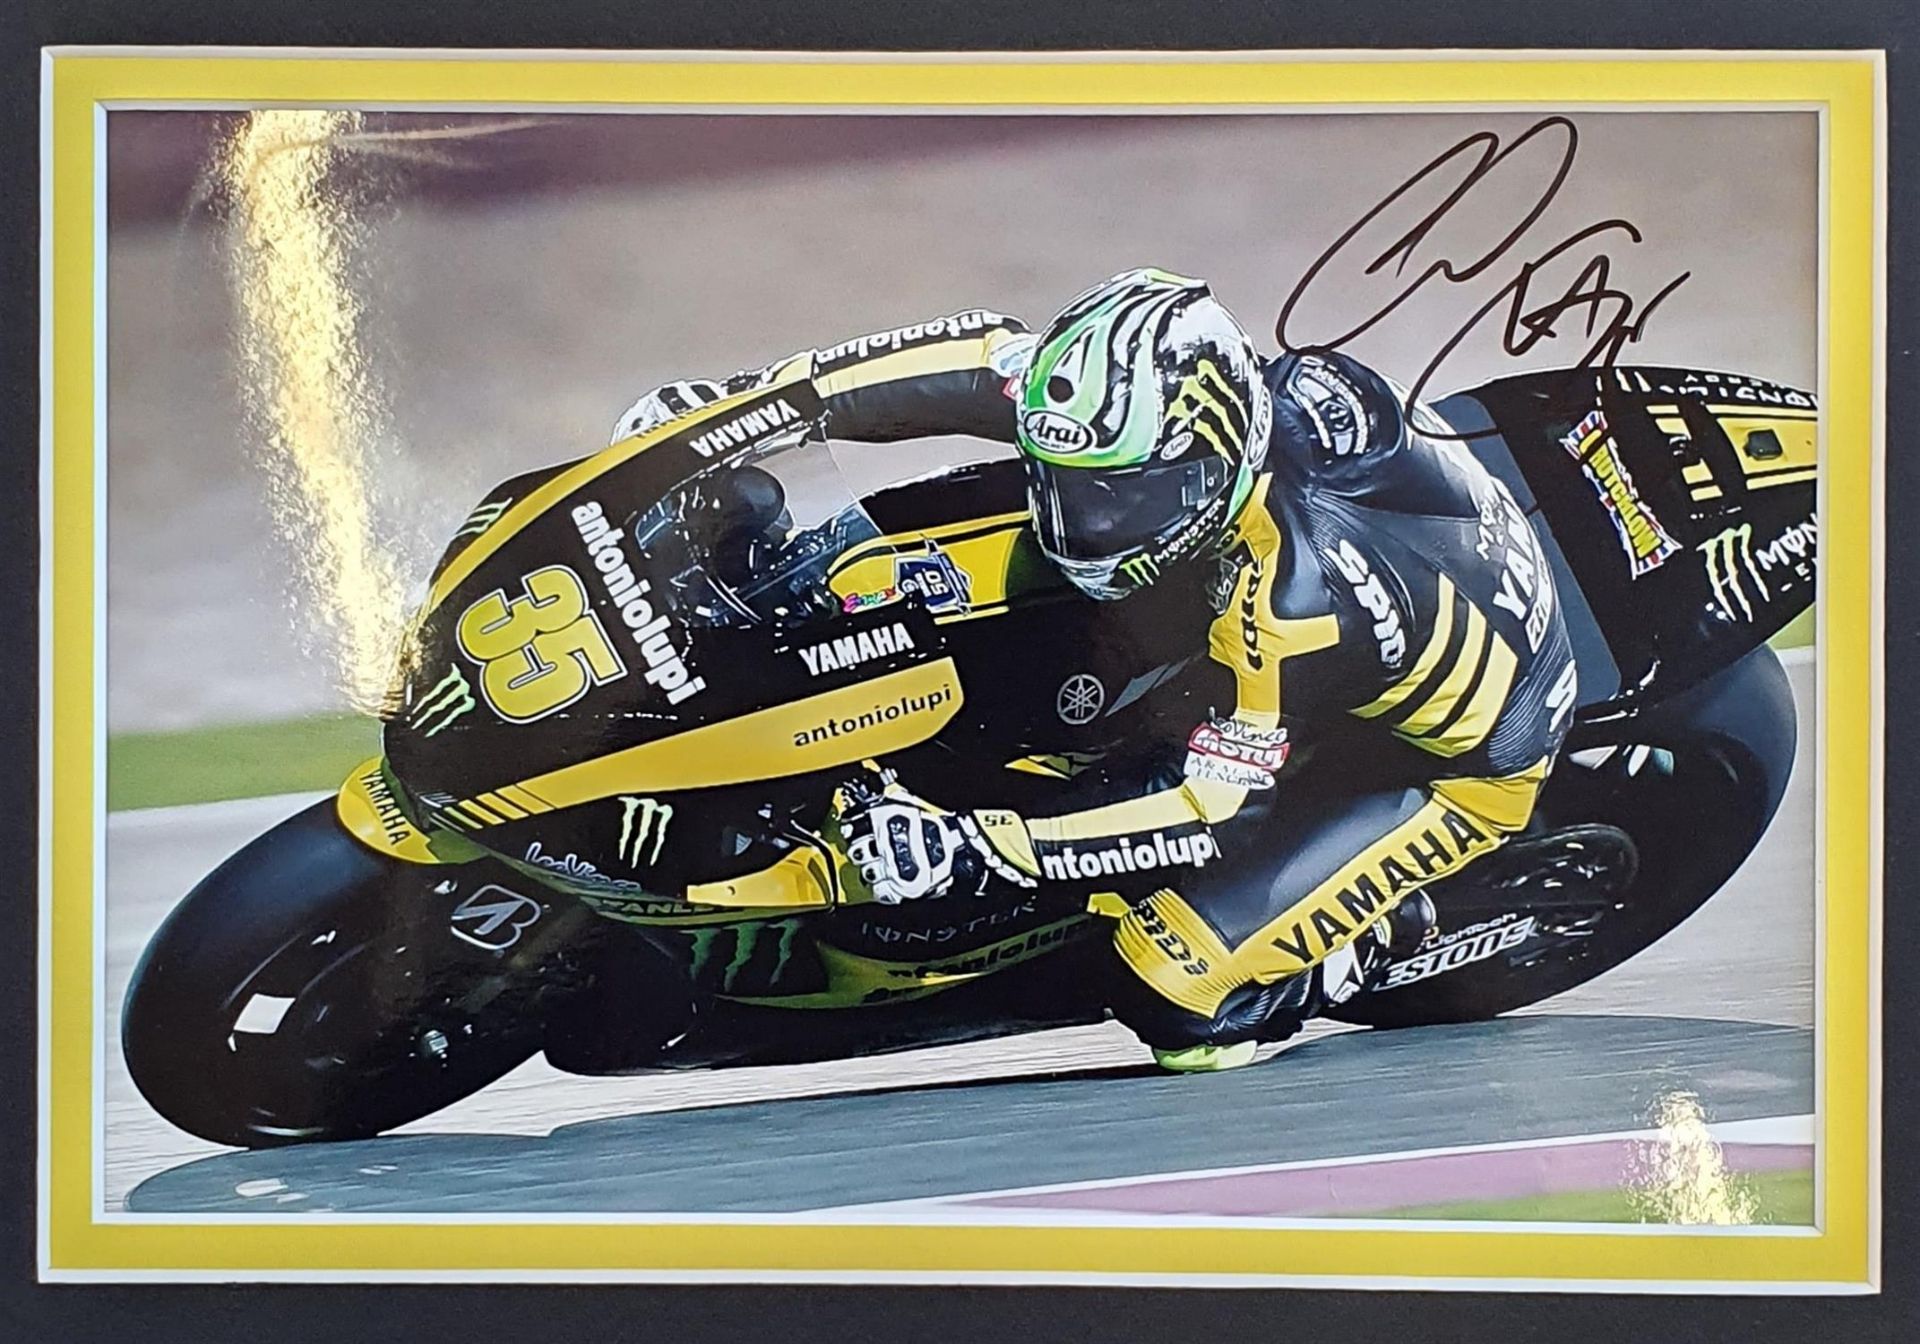 Signed Photograph of Cal Crutchlow* - Image 3 of 3